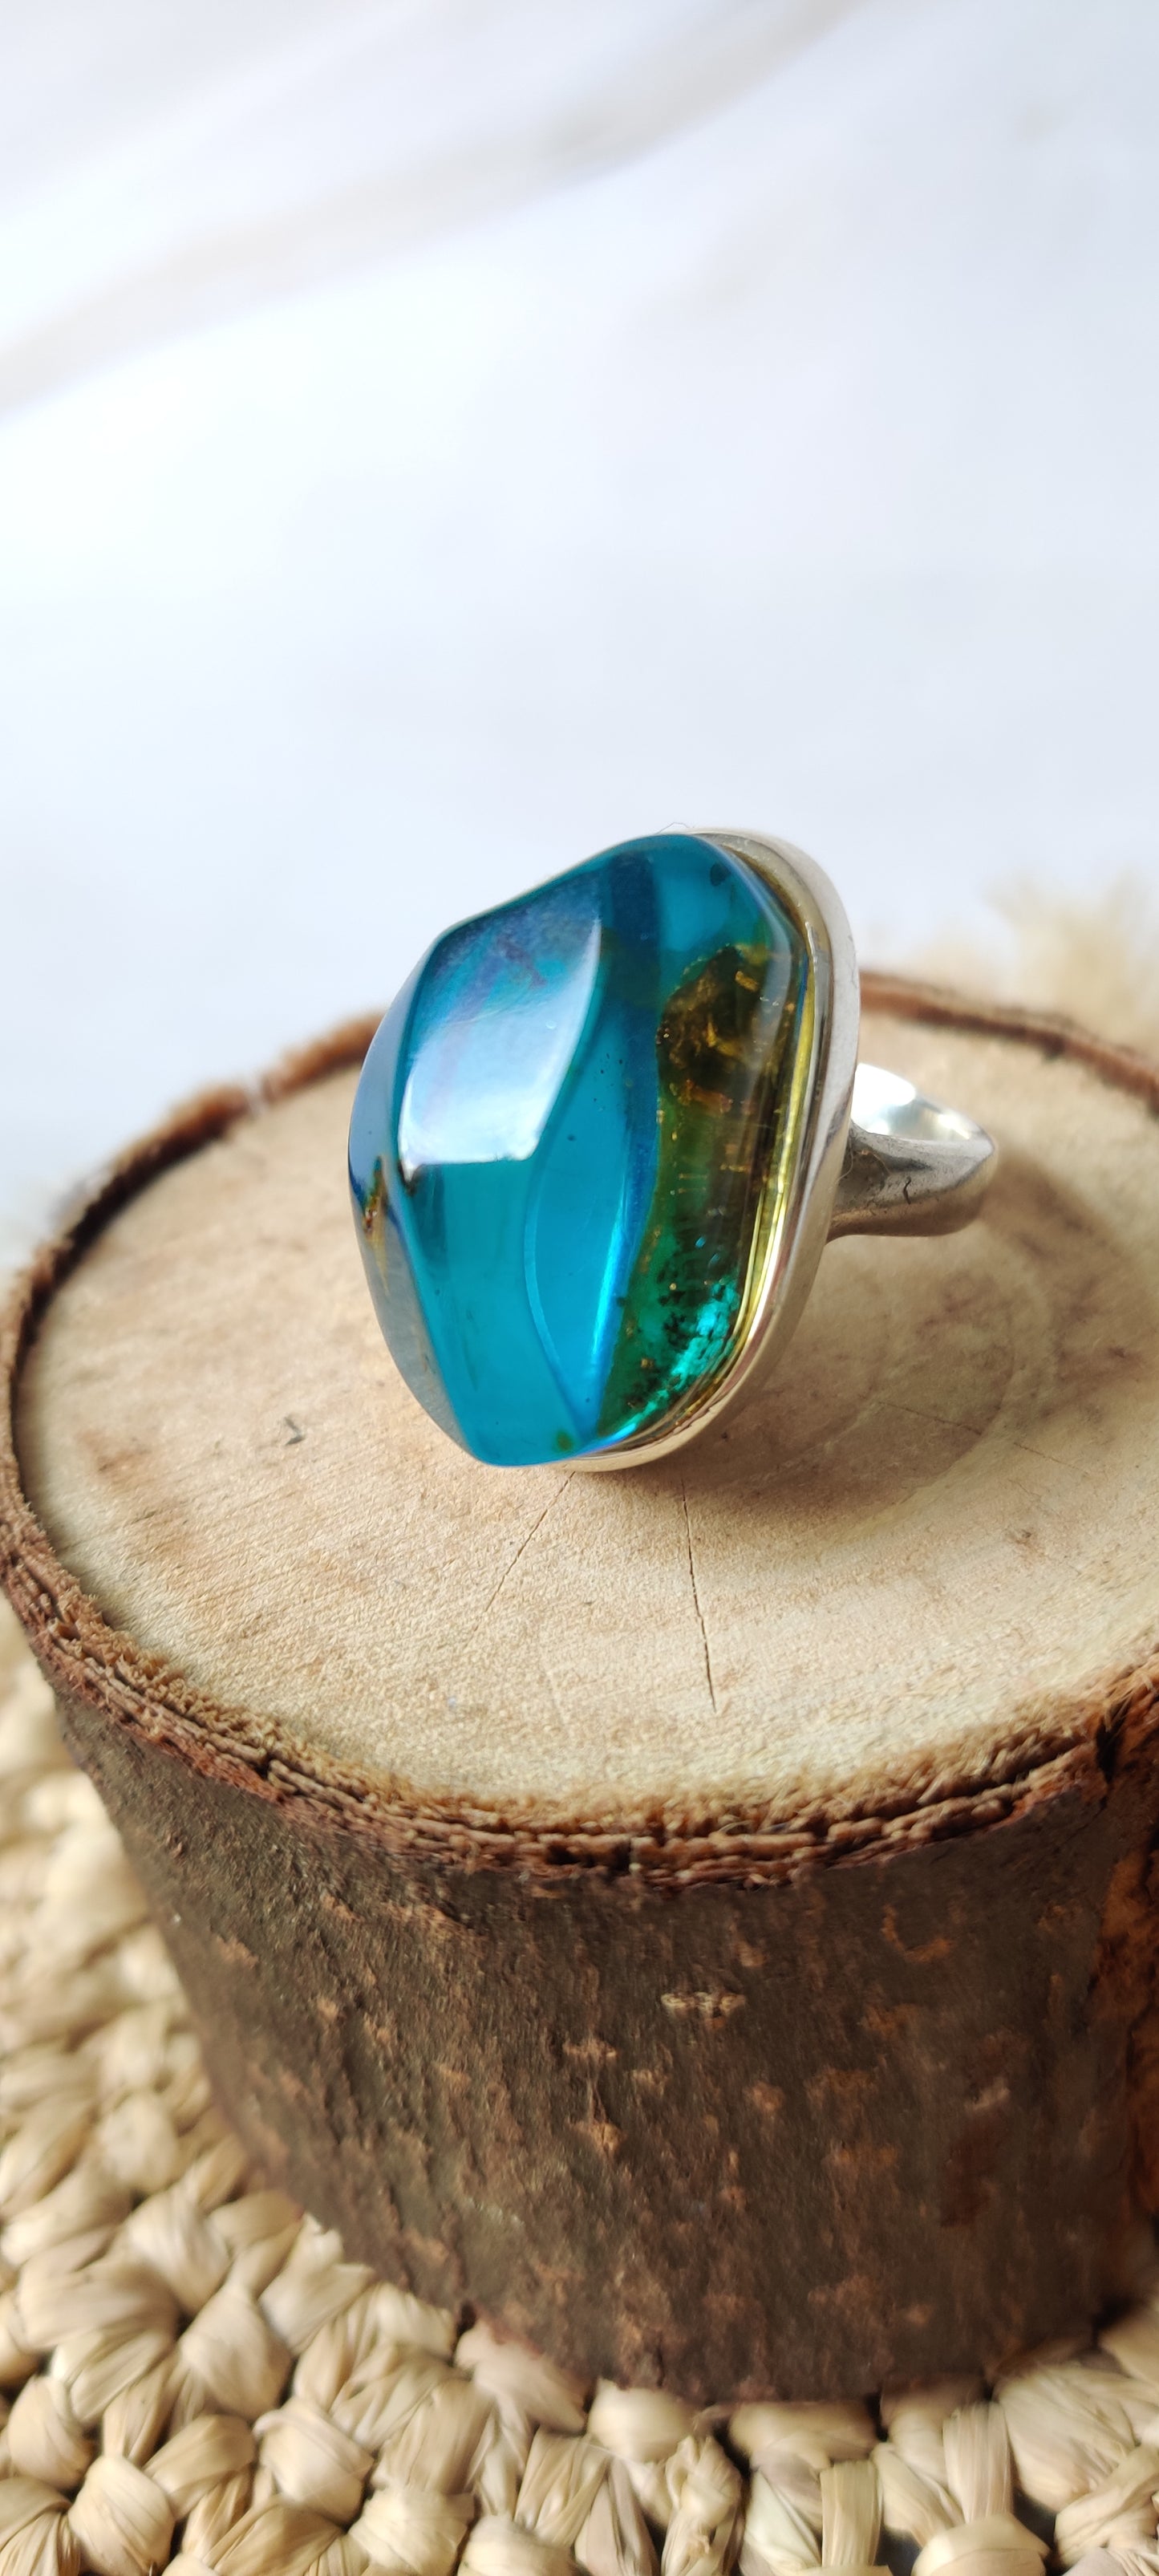 Unique Blue/ Citron Amber Ring with Insect (Ant) inclusion